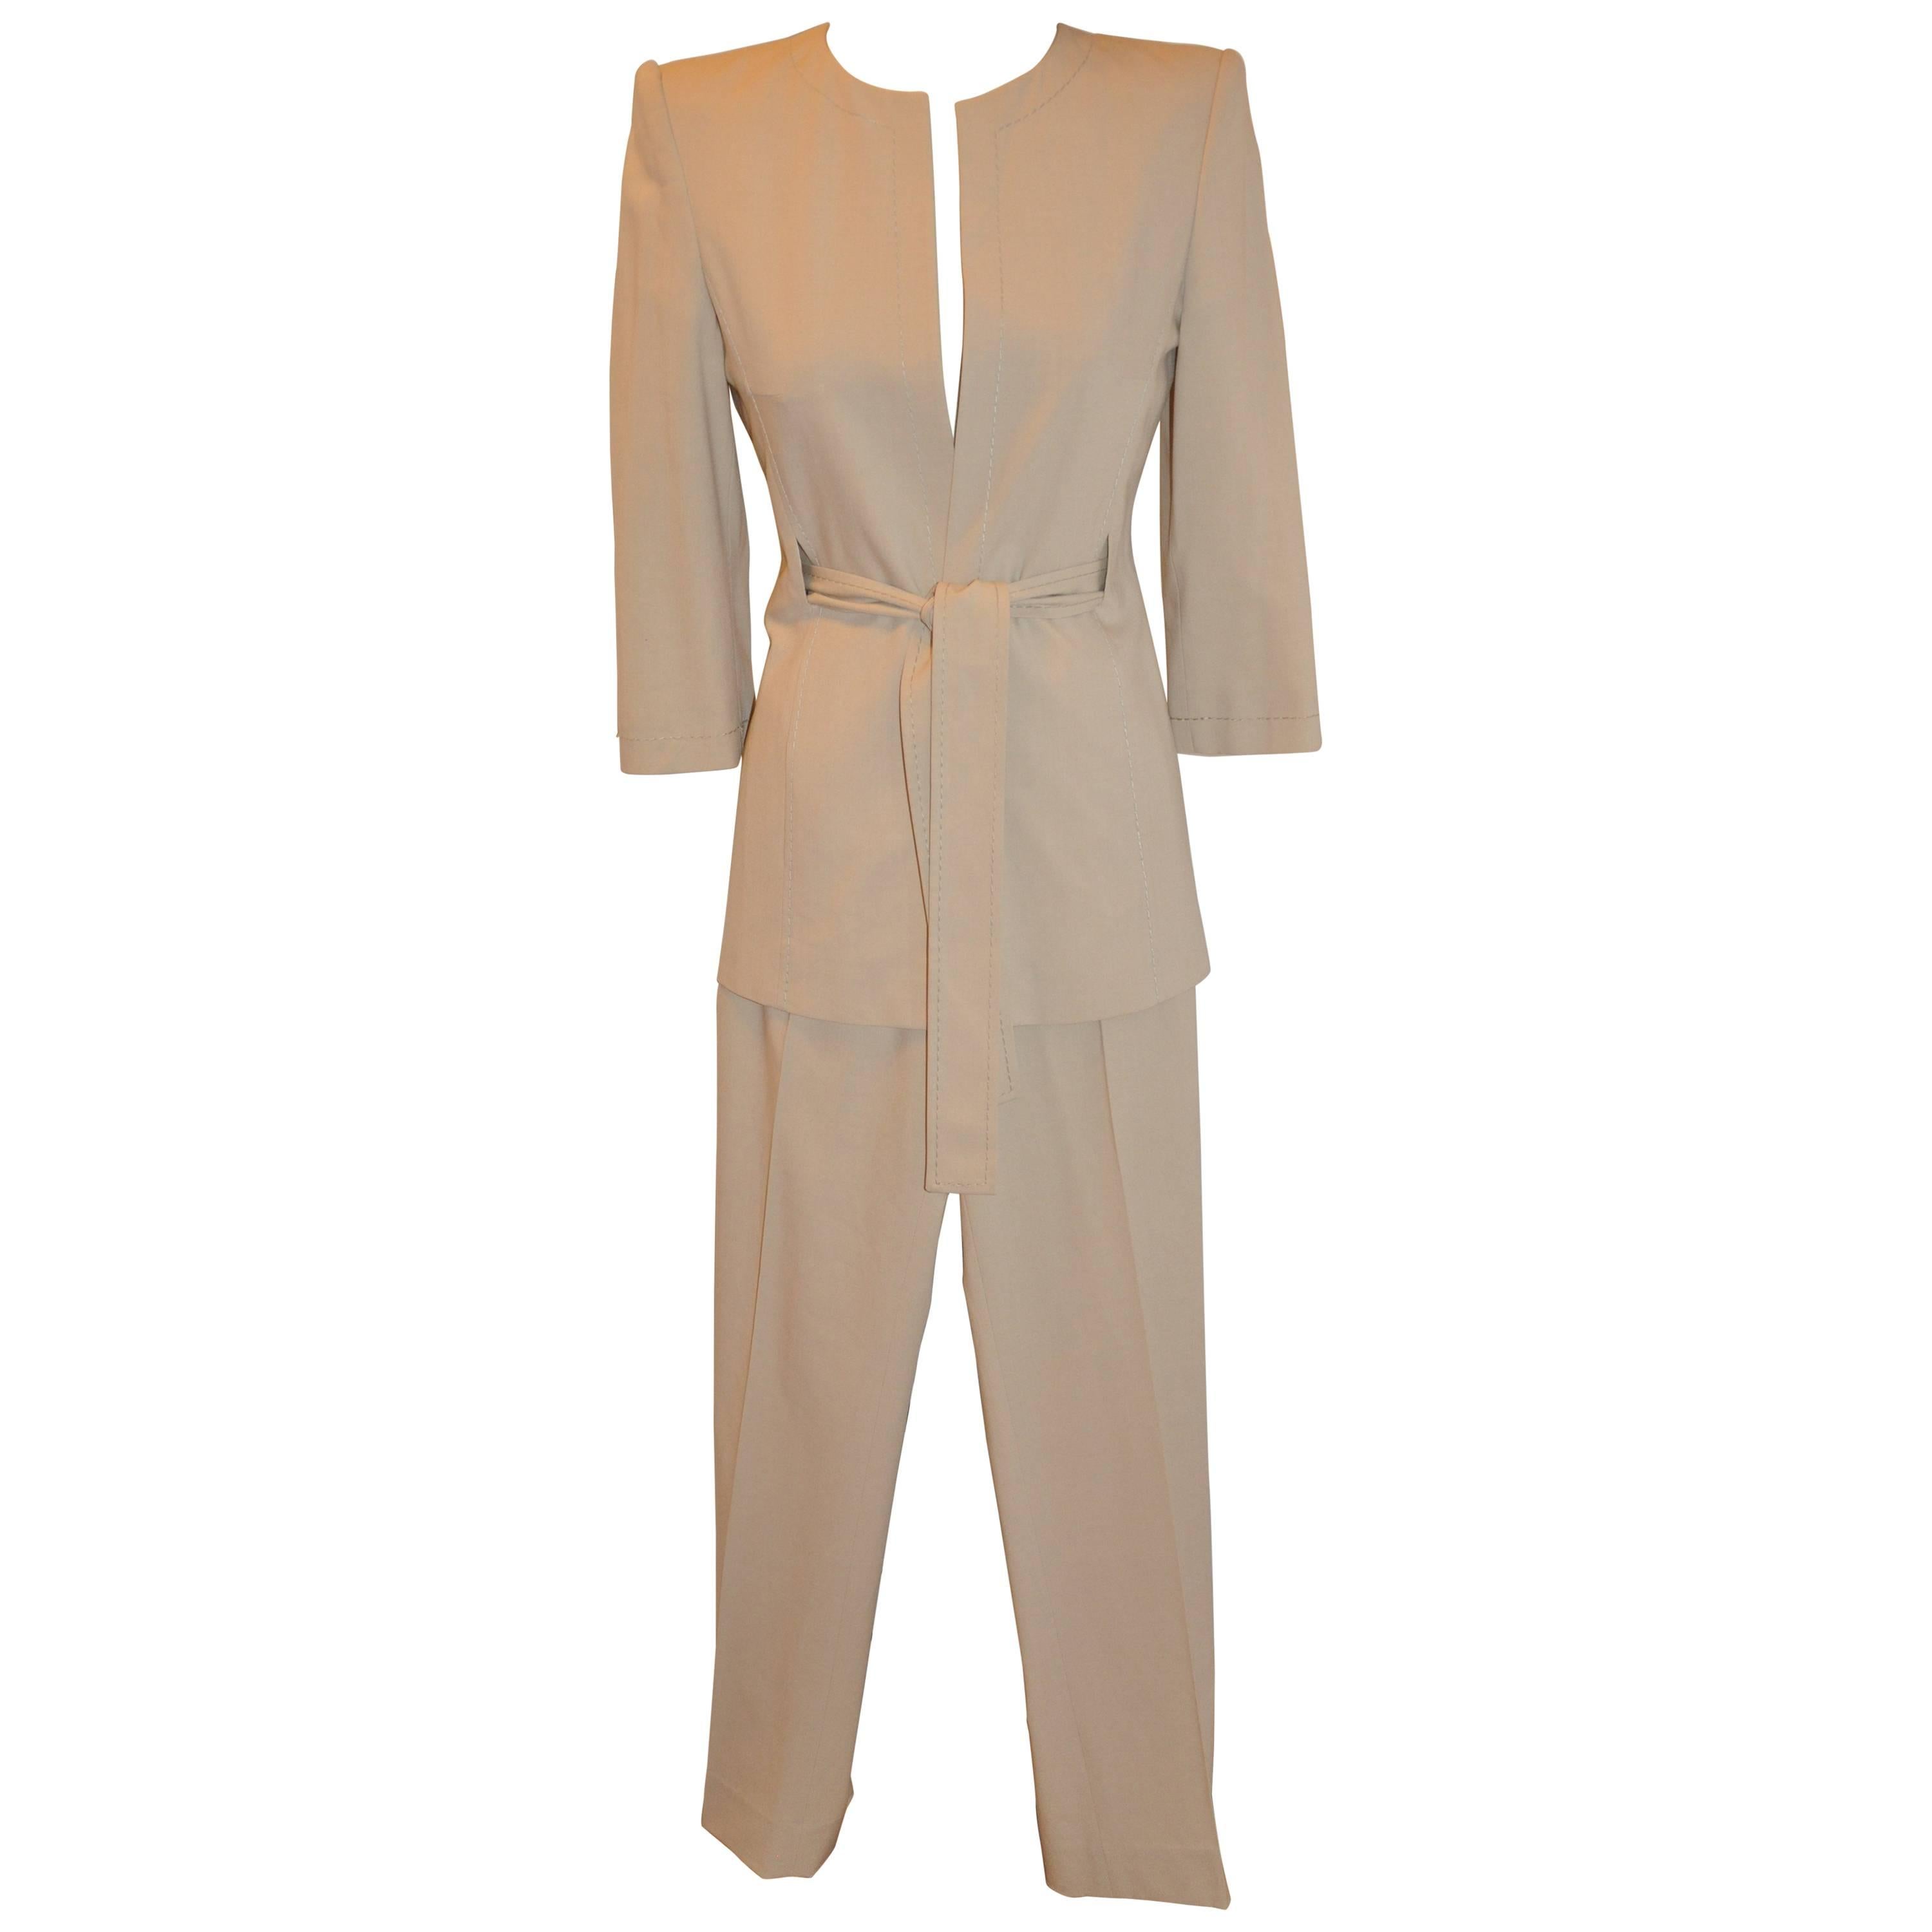 Gianfranco Ferre Silk Beige Tapered Pantsuit with Three-Quarter Sleeves For Sale